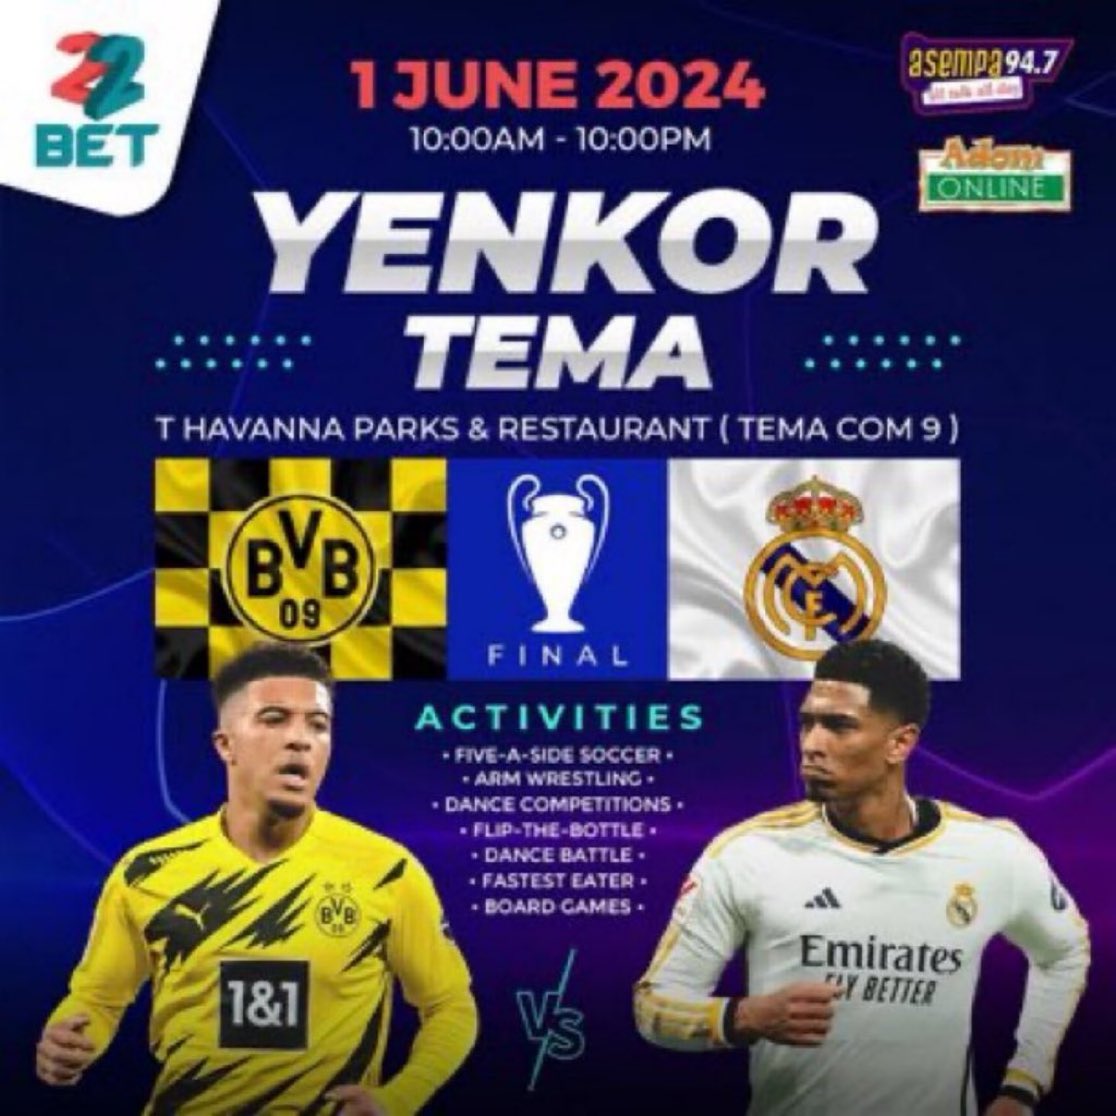 Join us for the UCL final WATCH PARTY at T Havana Park in Tema (Com. 9)! Enjoy the chance to win amazing prizes, including jerseys, 22Bet-branded caps, T-shirts, face towels, and bottles. #22BetAlwaysPays